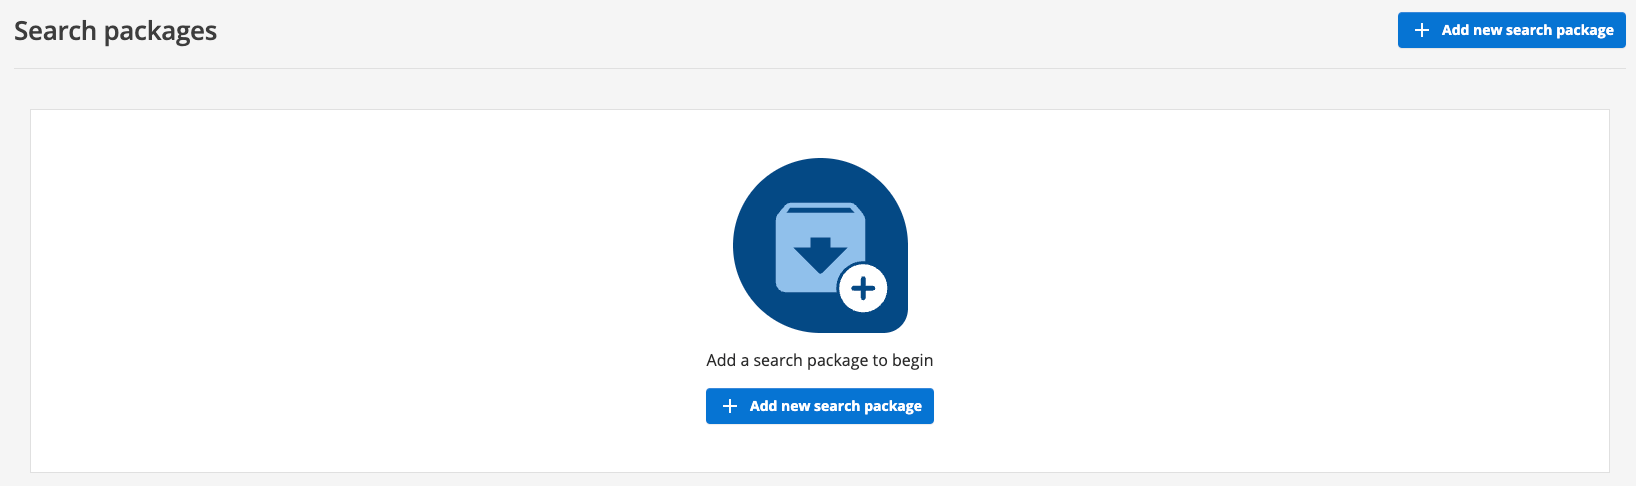 search package panel no search packages